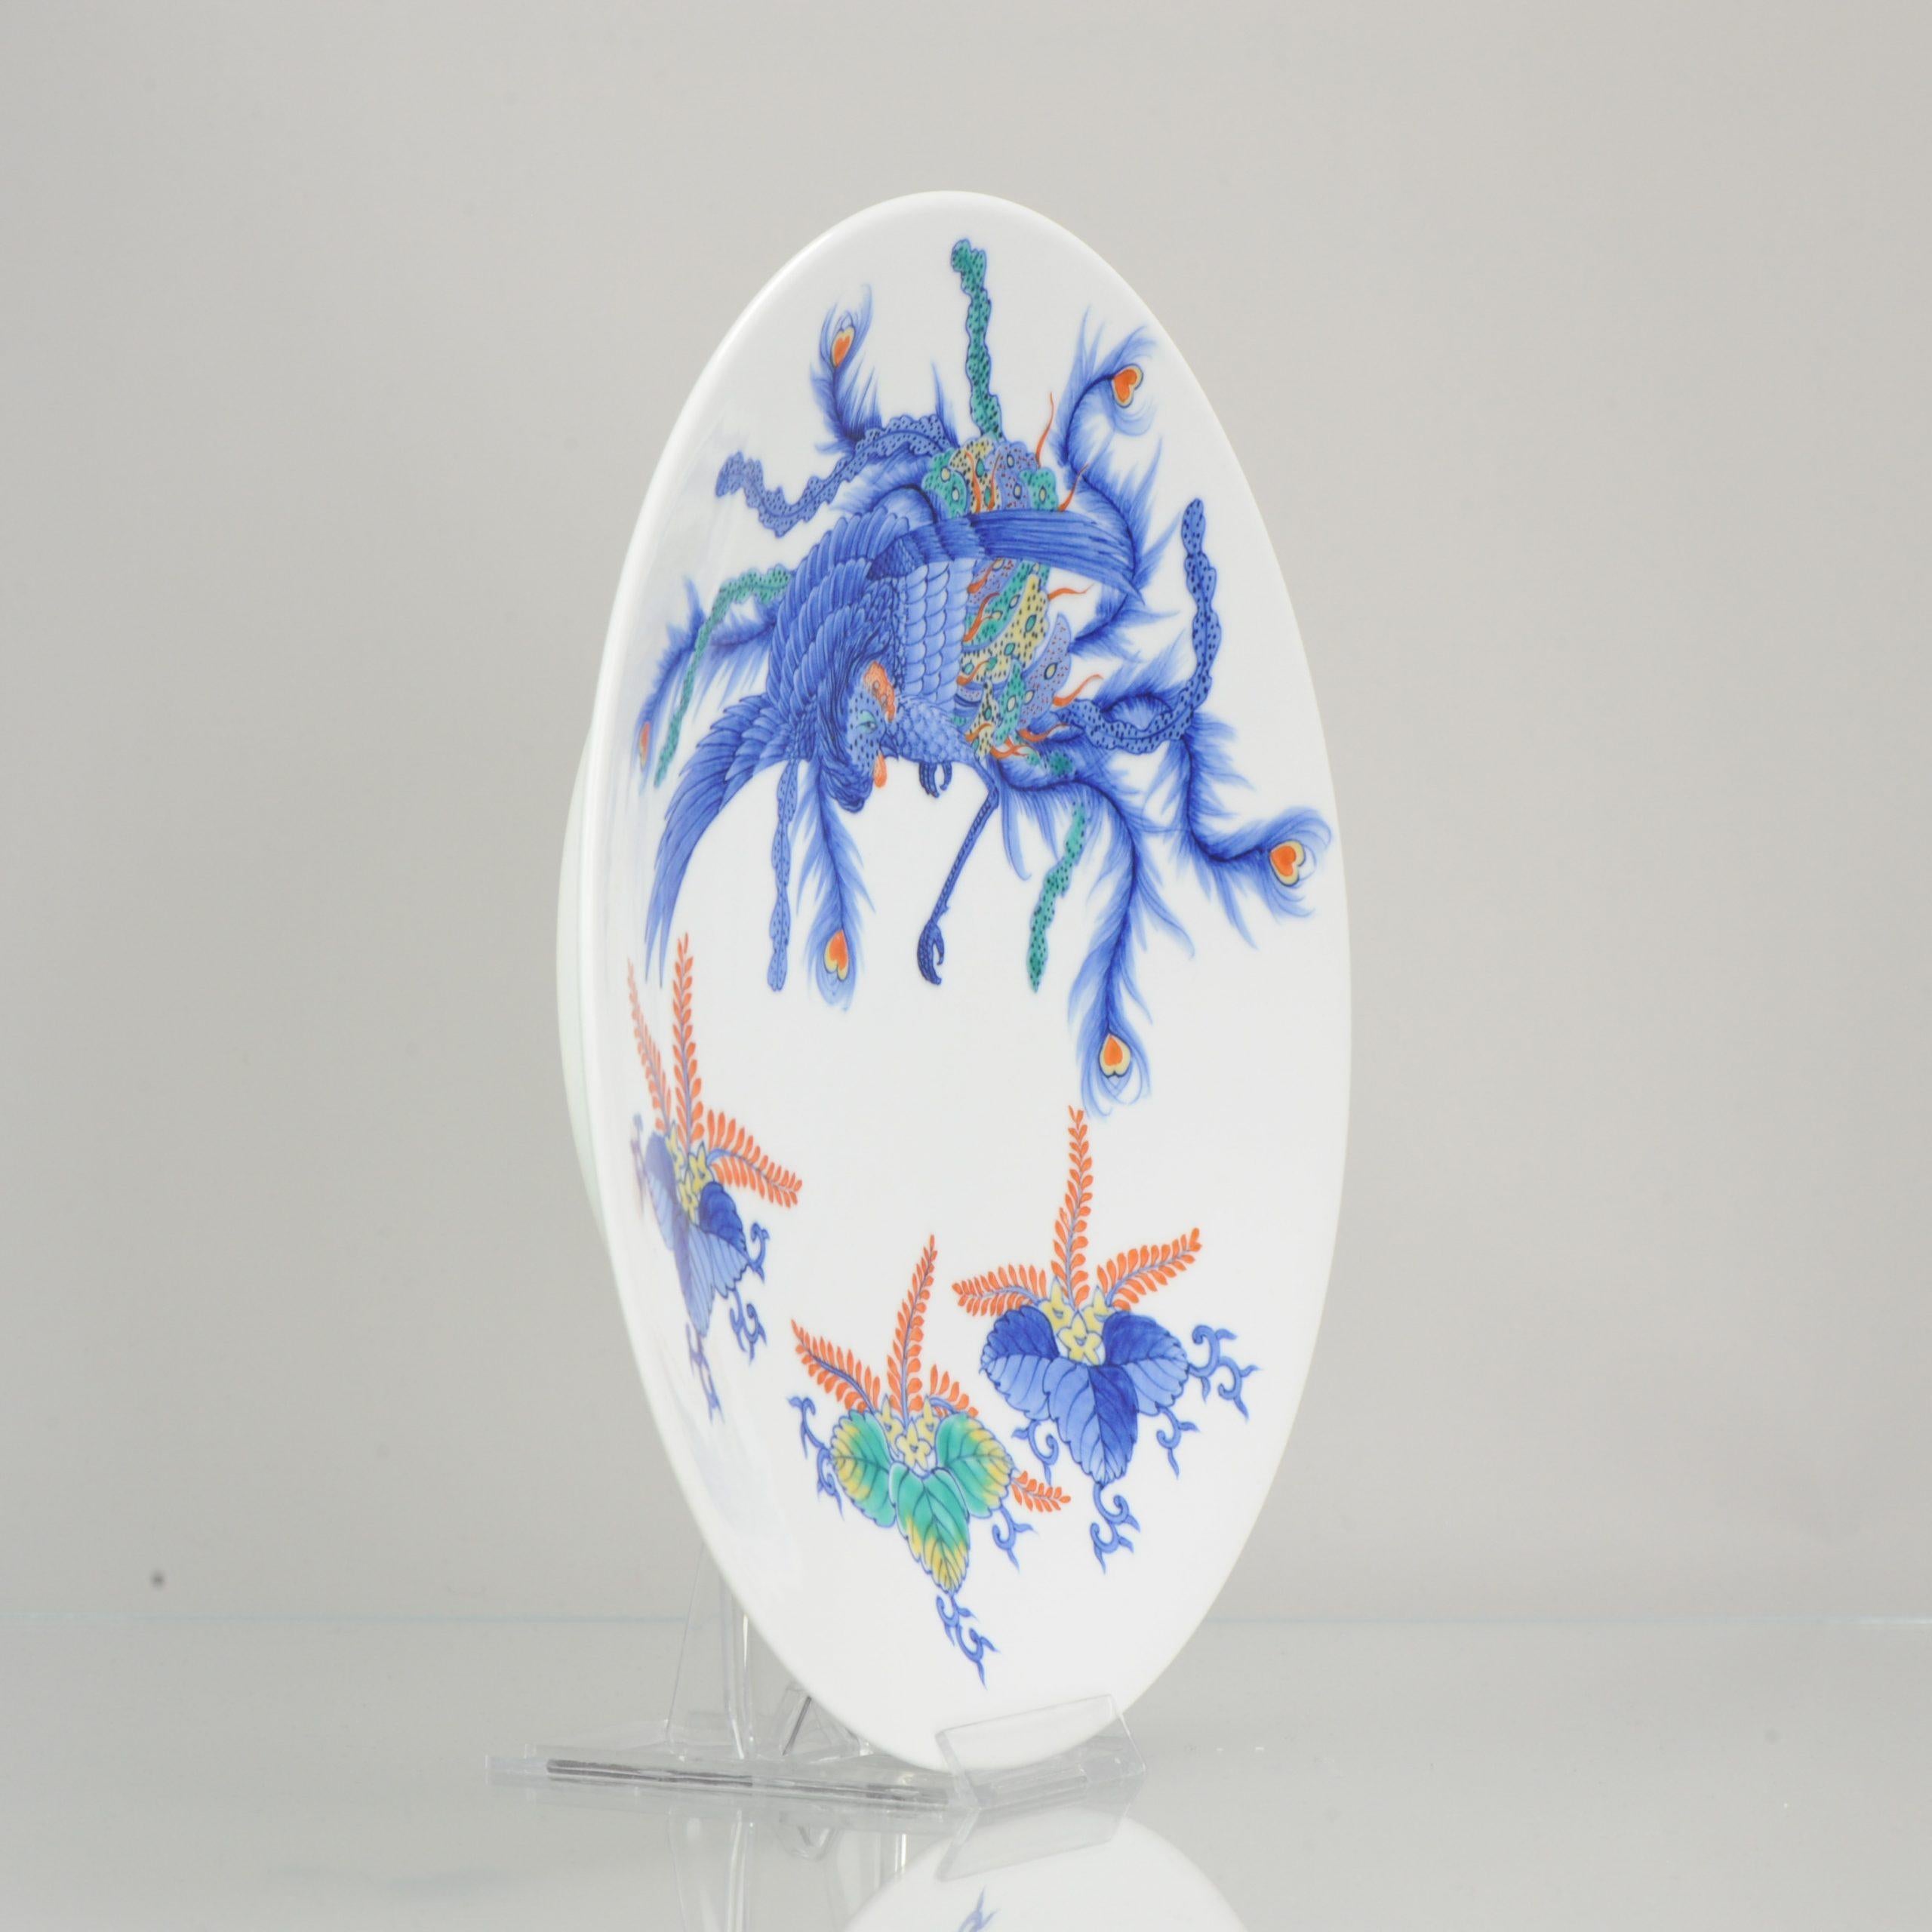 Lovely Japanese Porcelain plate with nice bright coloring and an interestings scene.

Additional information:
Material: Porcelain 
Period: 20th Century
Condition: Overall Condition Perfect
Dimension: Ø 26.7 H cm